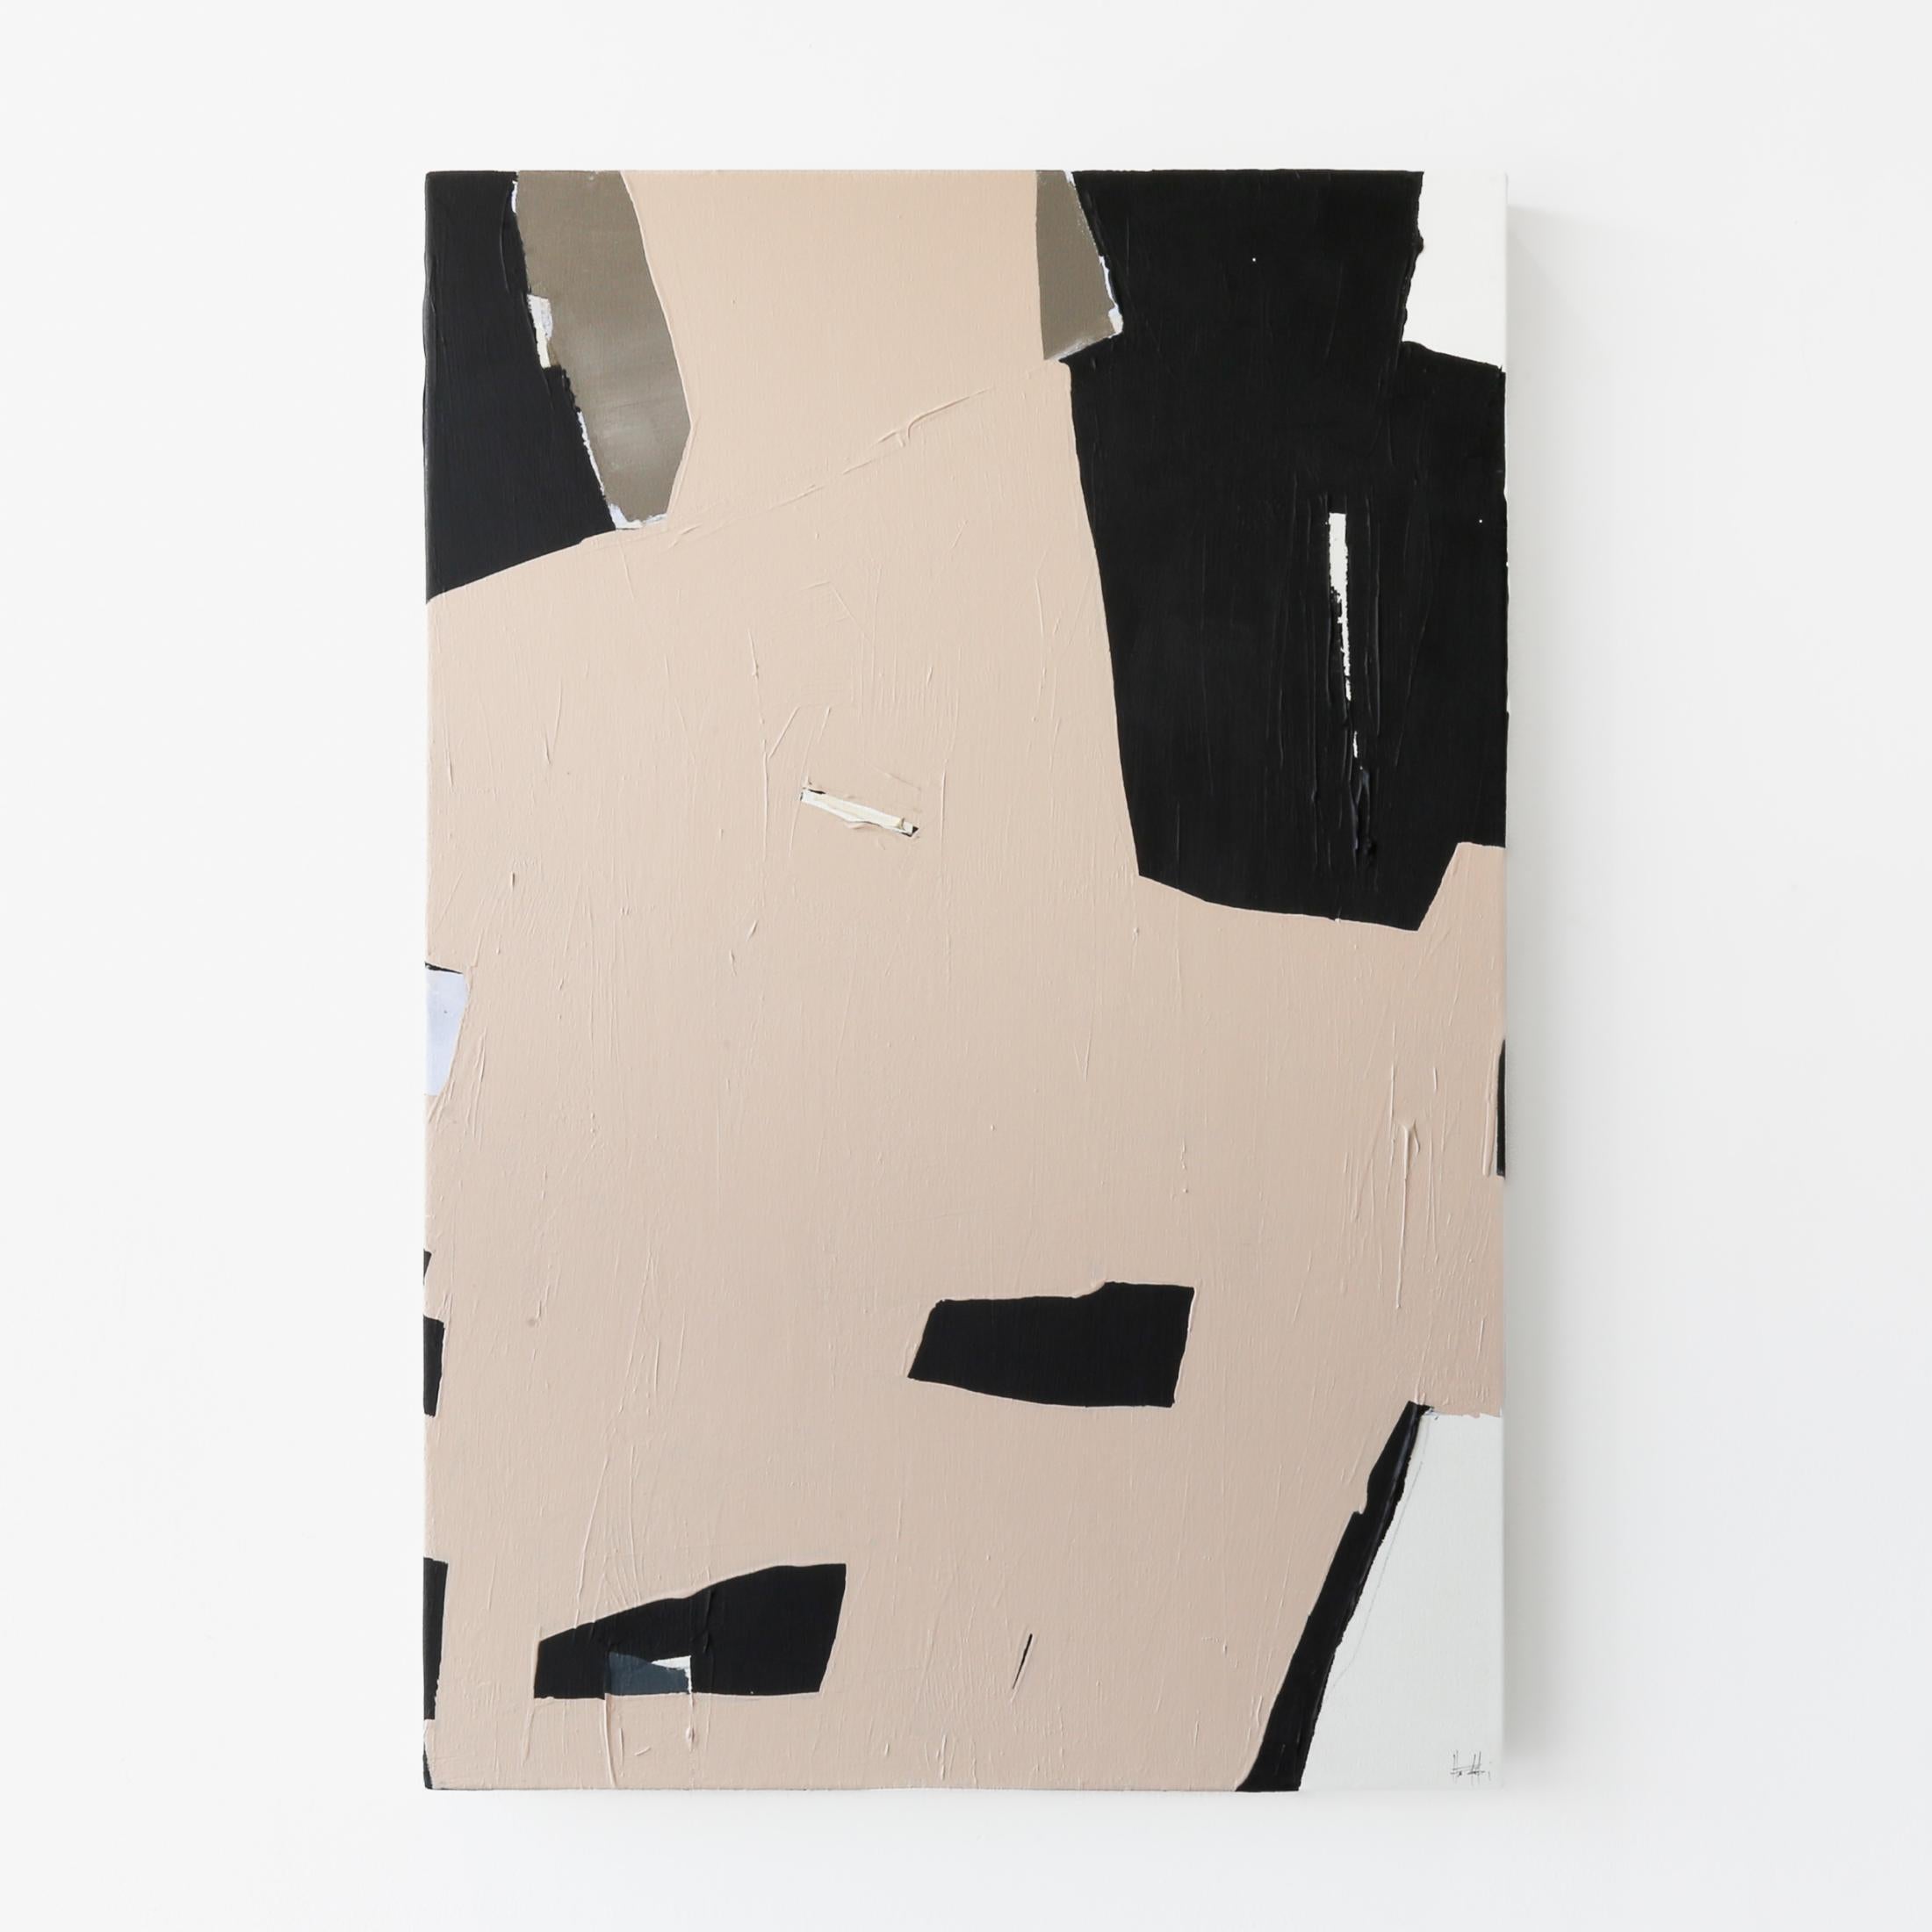 Holly Addi is a Salt Lake City based artist whose works follow the legacy of abstract expressionism artists before her such as Helen Frankenthaler and Clyfford Still, similarly embracing the power of negative space for a commanding visual effect. By